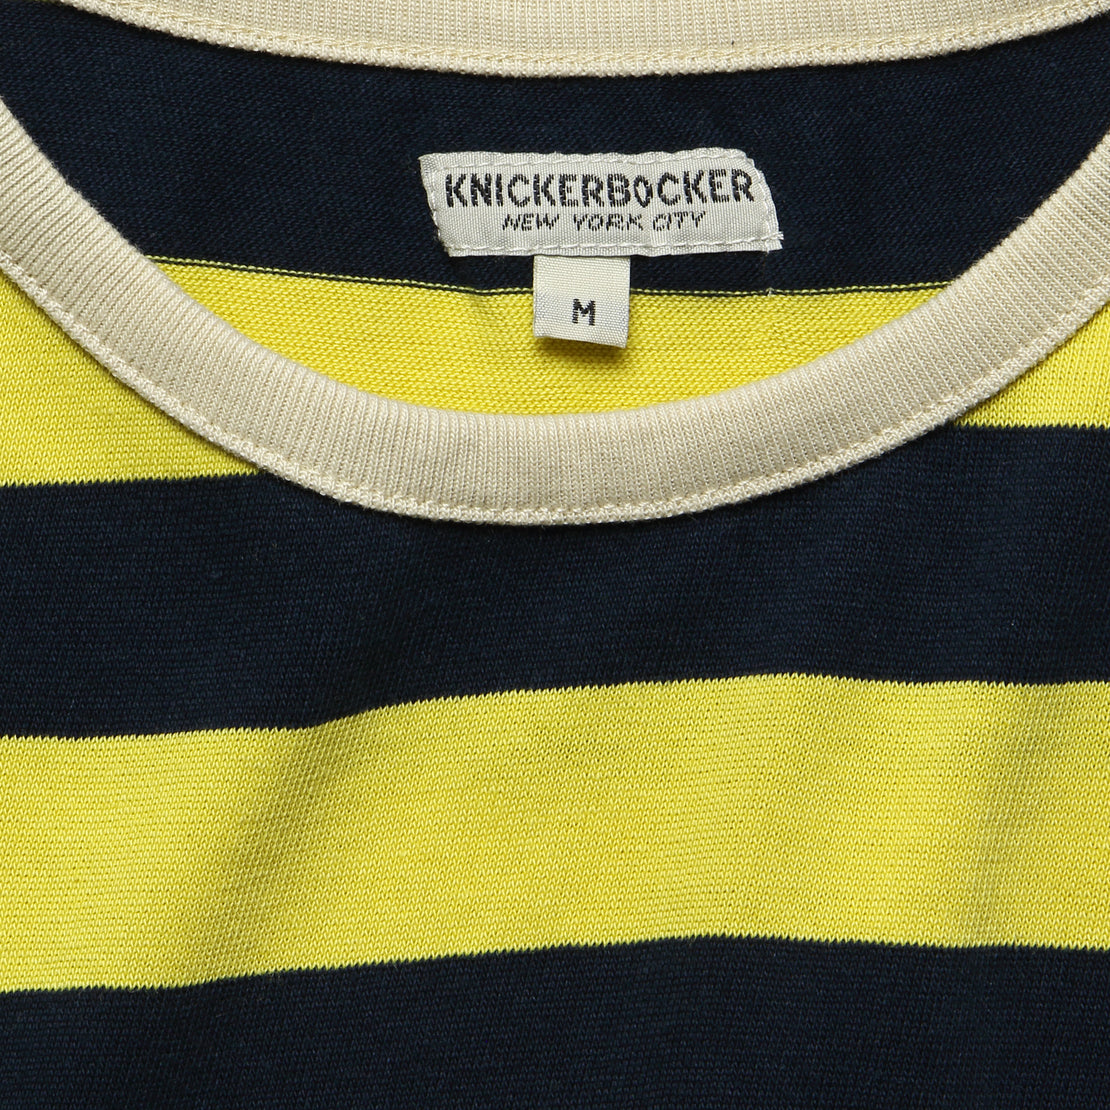 Mojave Striped Tee - Yellow/Blue - Knickerbocker - STAG Provisions - Tops - S/S Tee